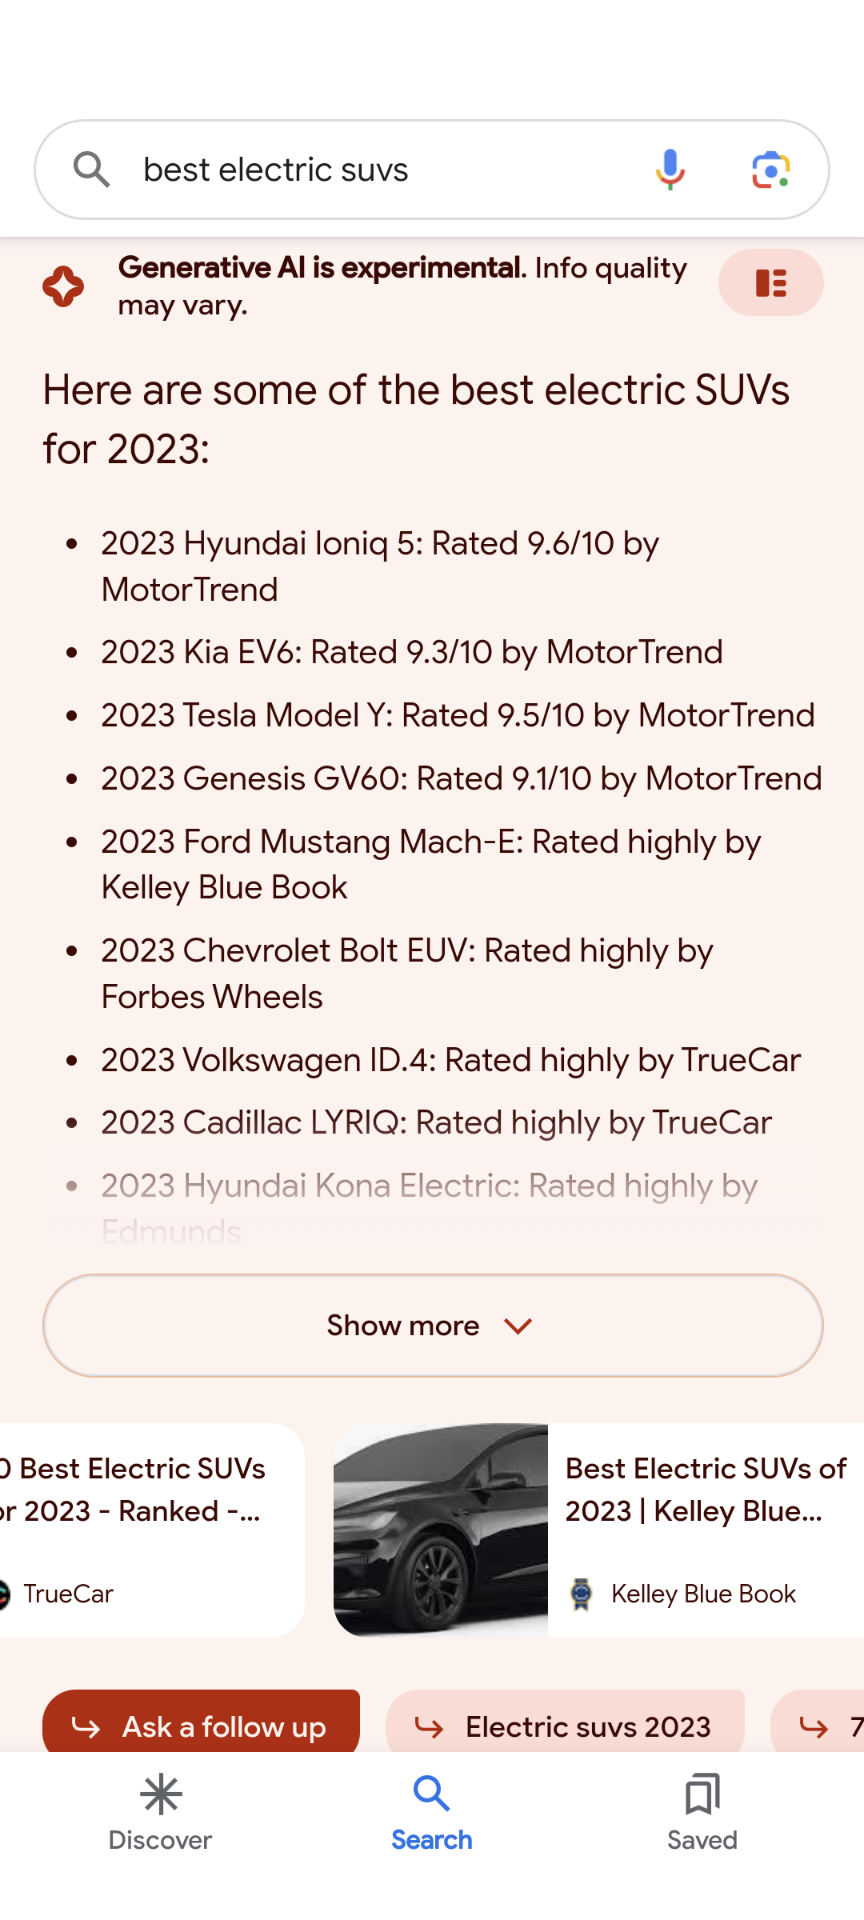 Google search box on mobile has the query ‘best electric suvs’ the Generative AI response lists several vehicles and then shows a carousel of links with images below the results